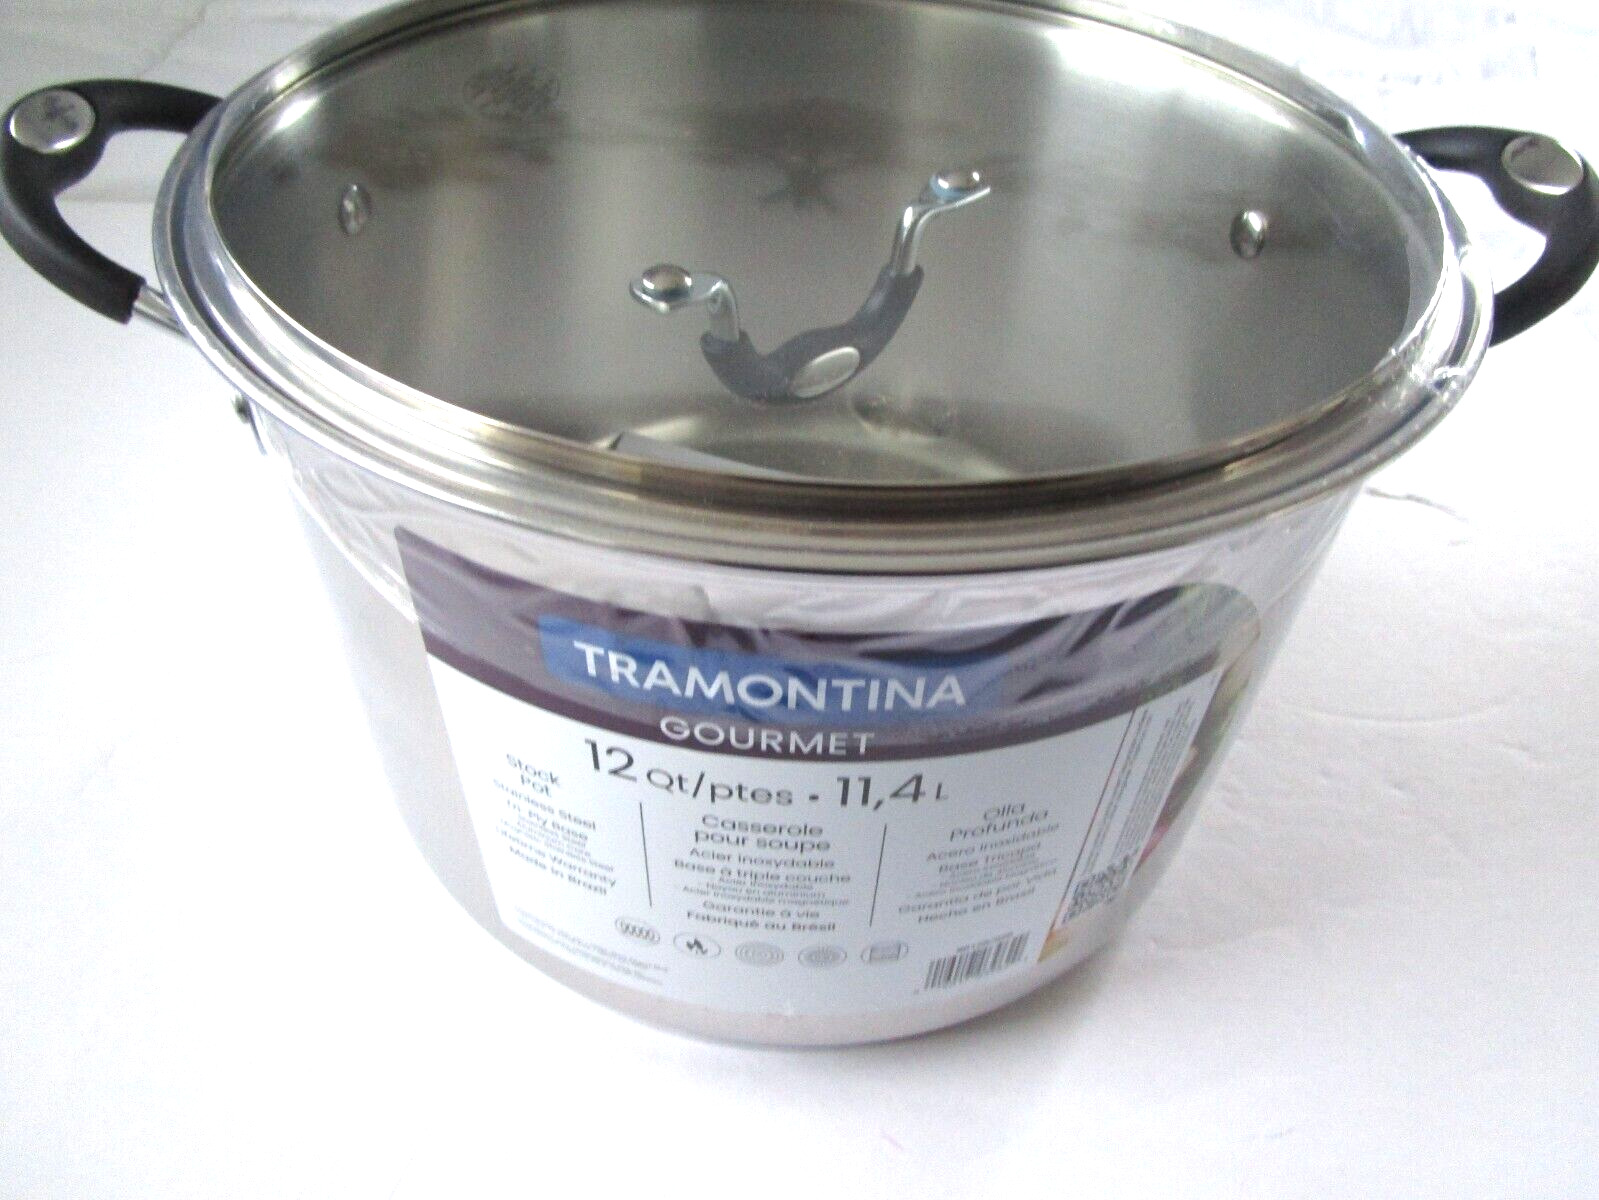 Tramontina 12 Quart Tri-Ply Base Stainless Steel Stock Pot W/Lid Cool Grip Handl